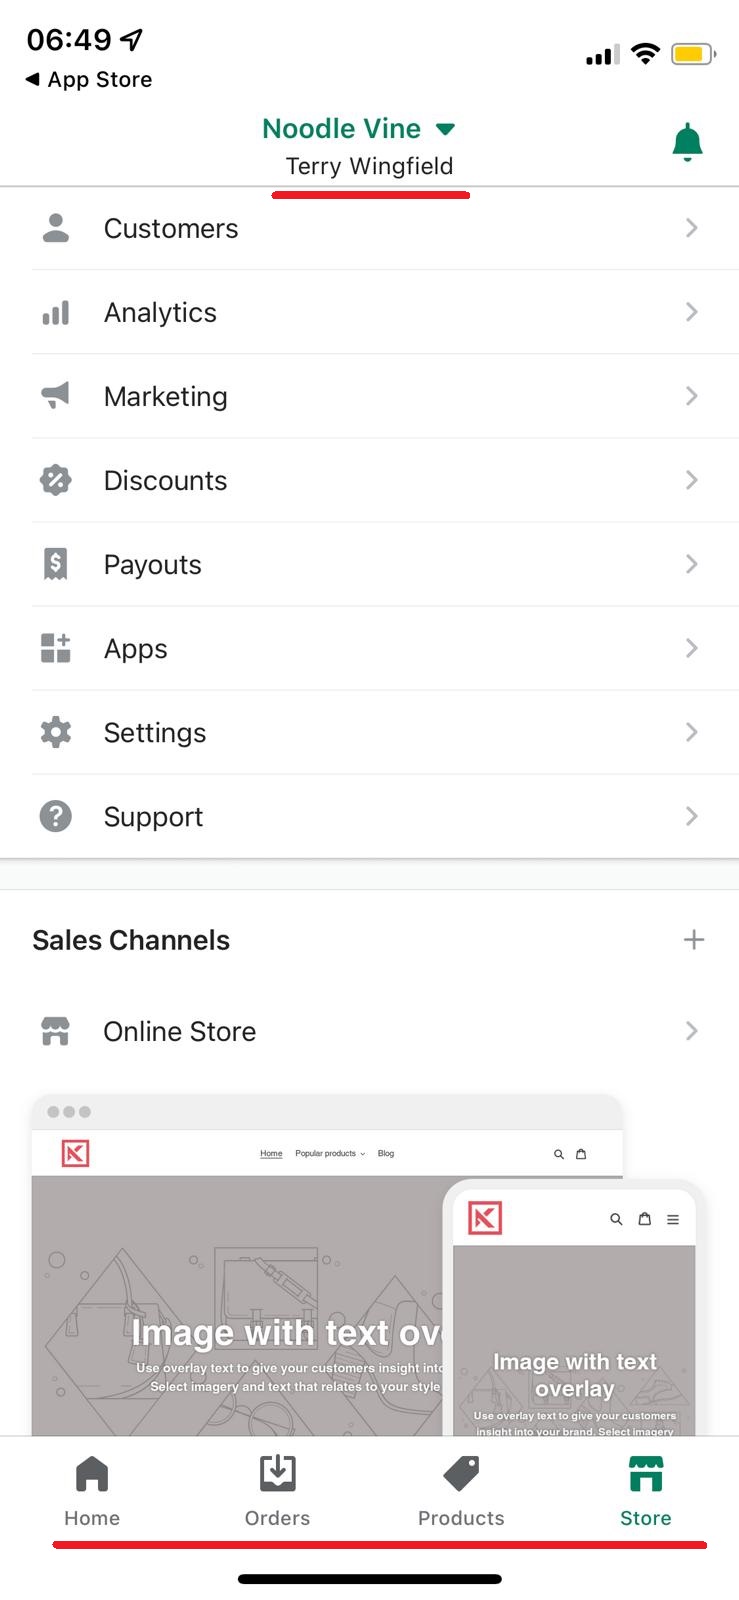 Successfully logged into Shopify using the iOS app